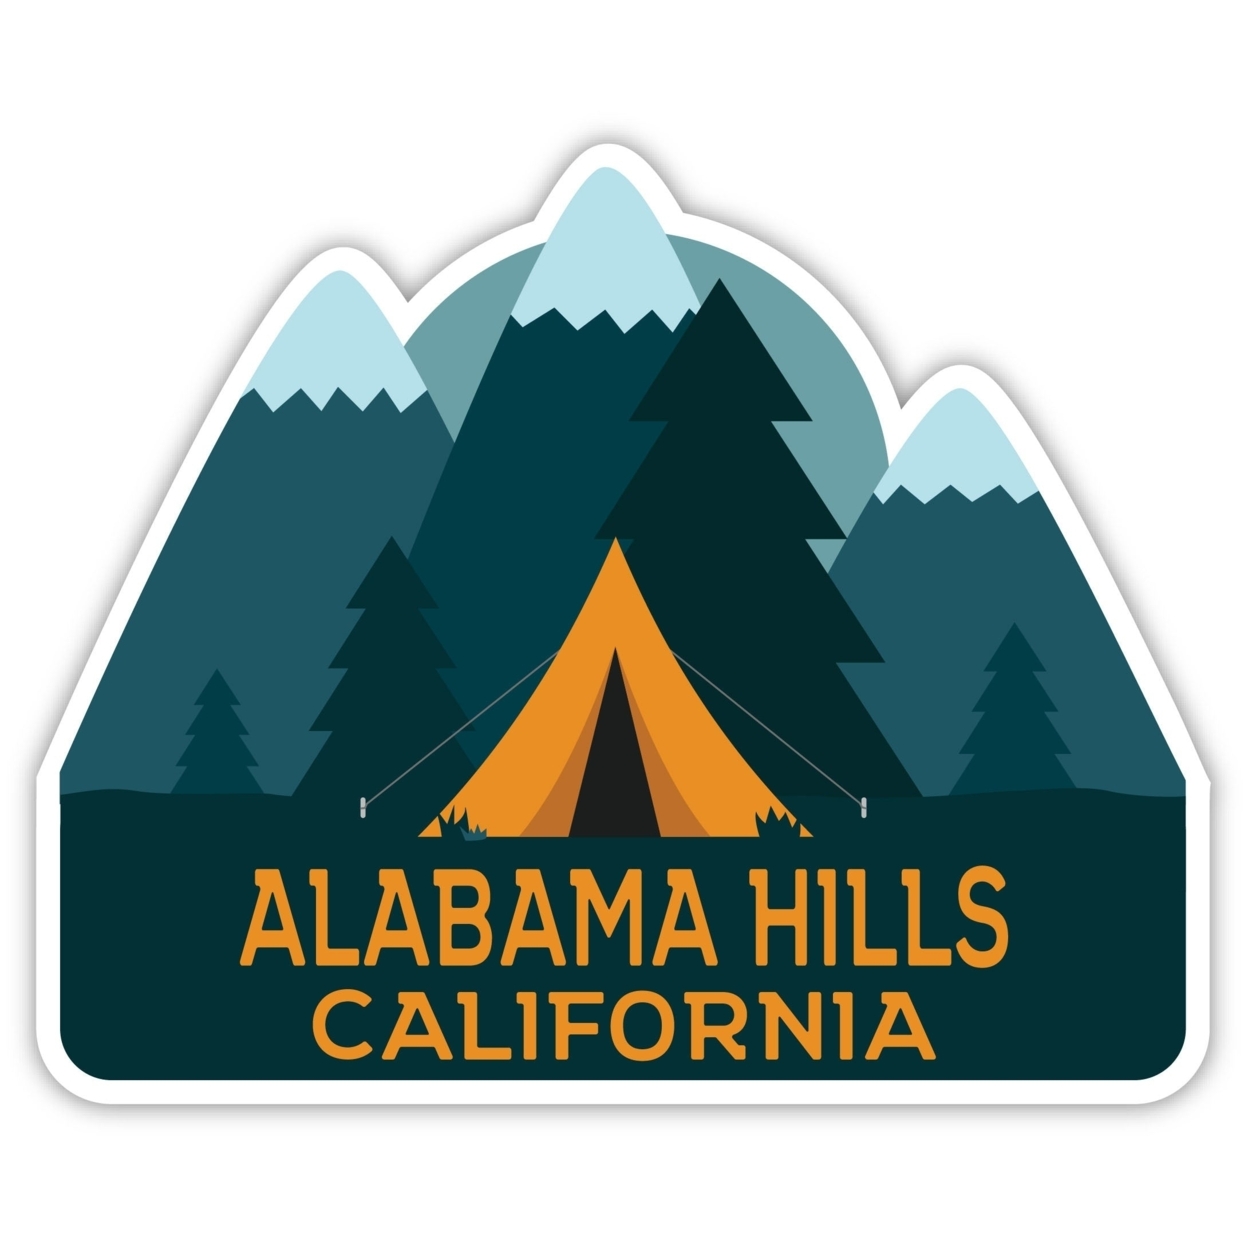 Alabama Hills California Souvenir Decorative Stickers (Choose Theme And Size) - 4-Pack, 2-Inch, Tent